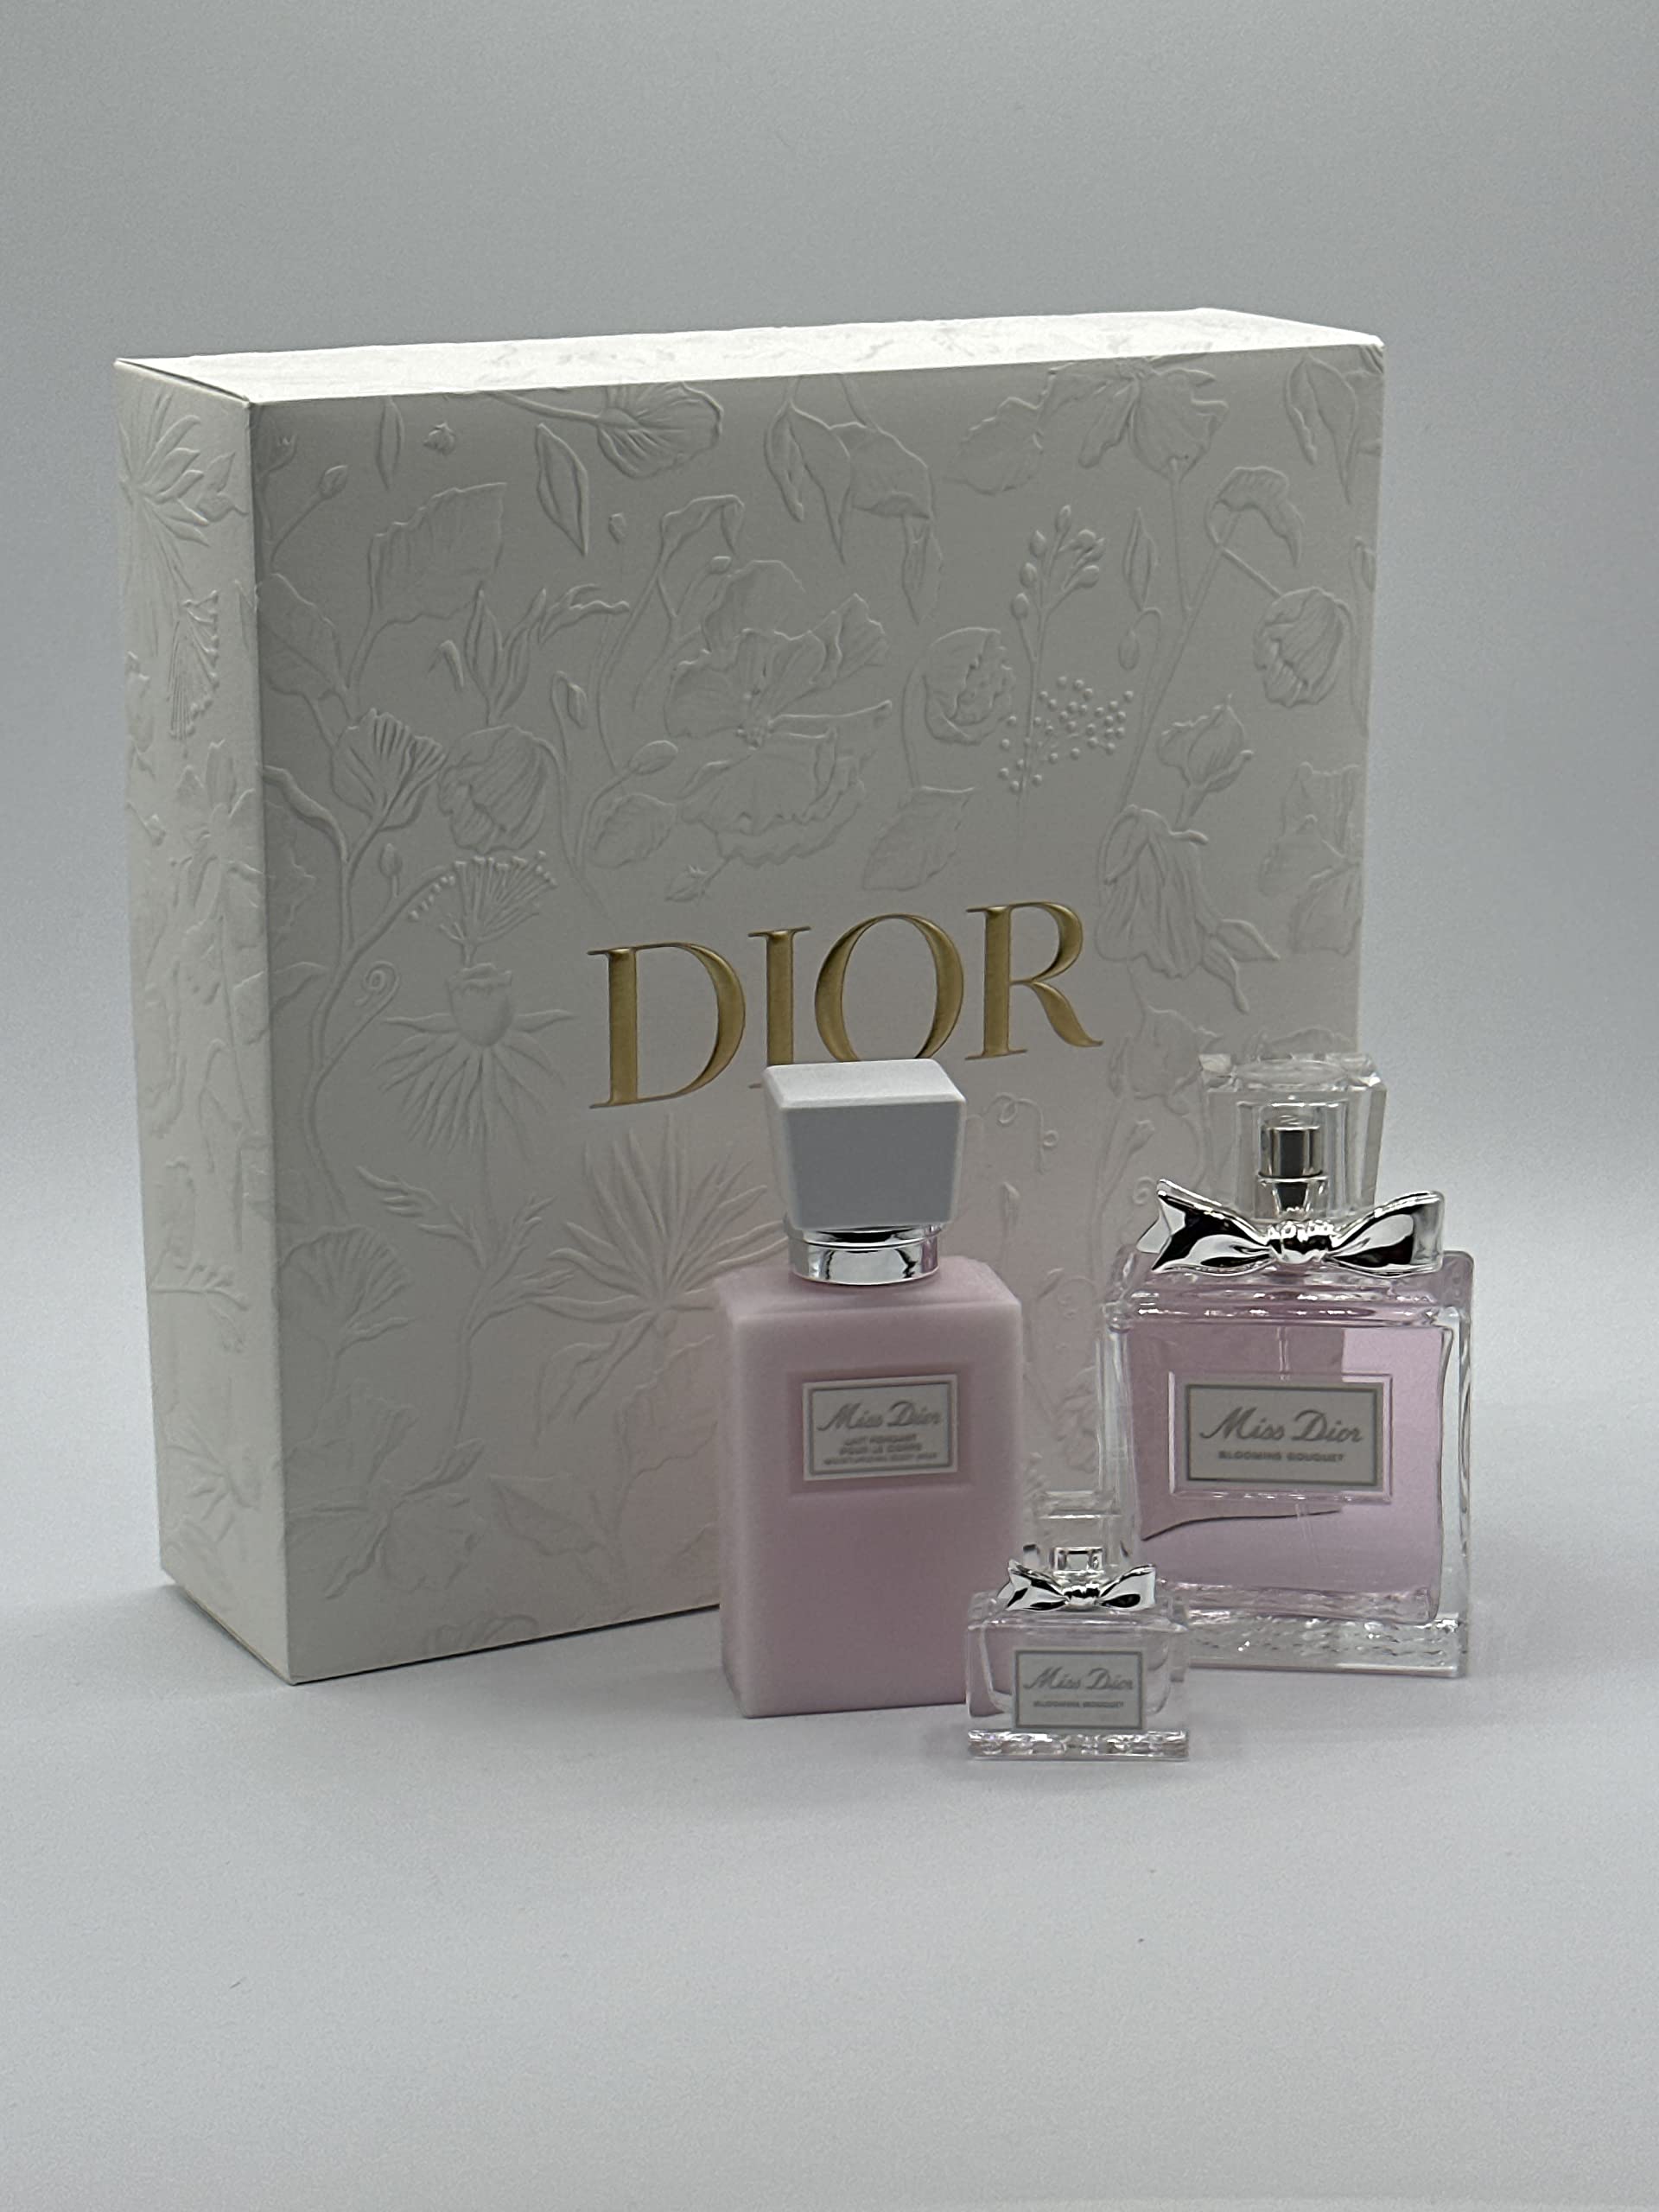 Miss Dior Blooming Bouquet Set